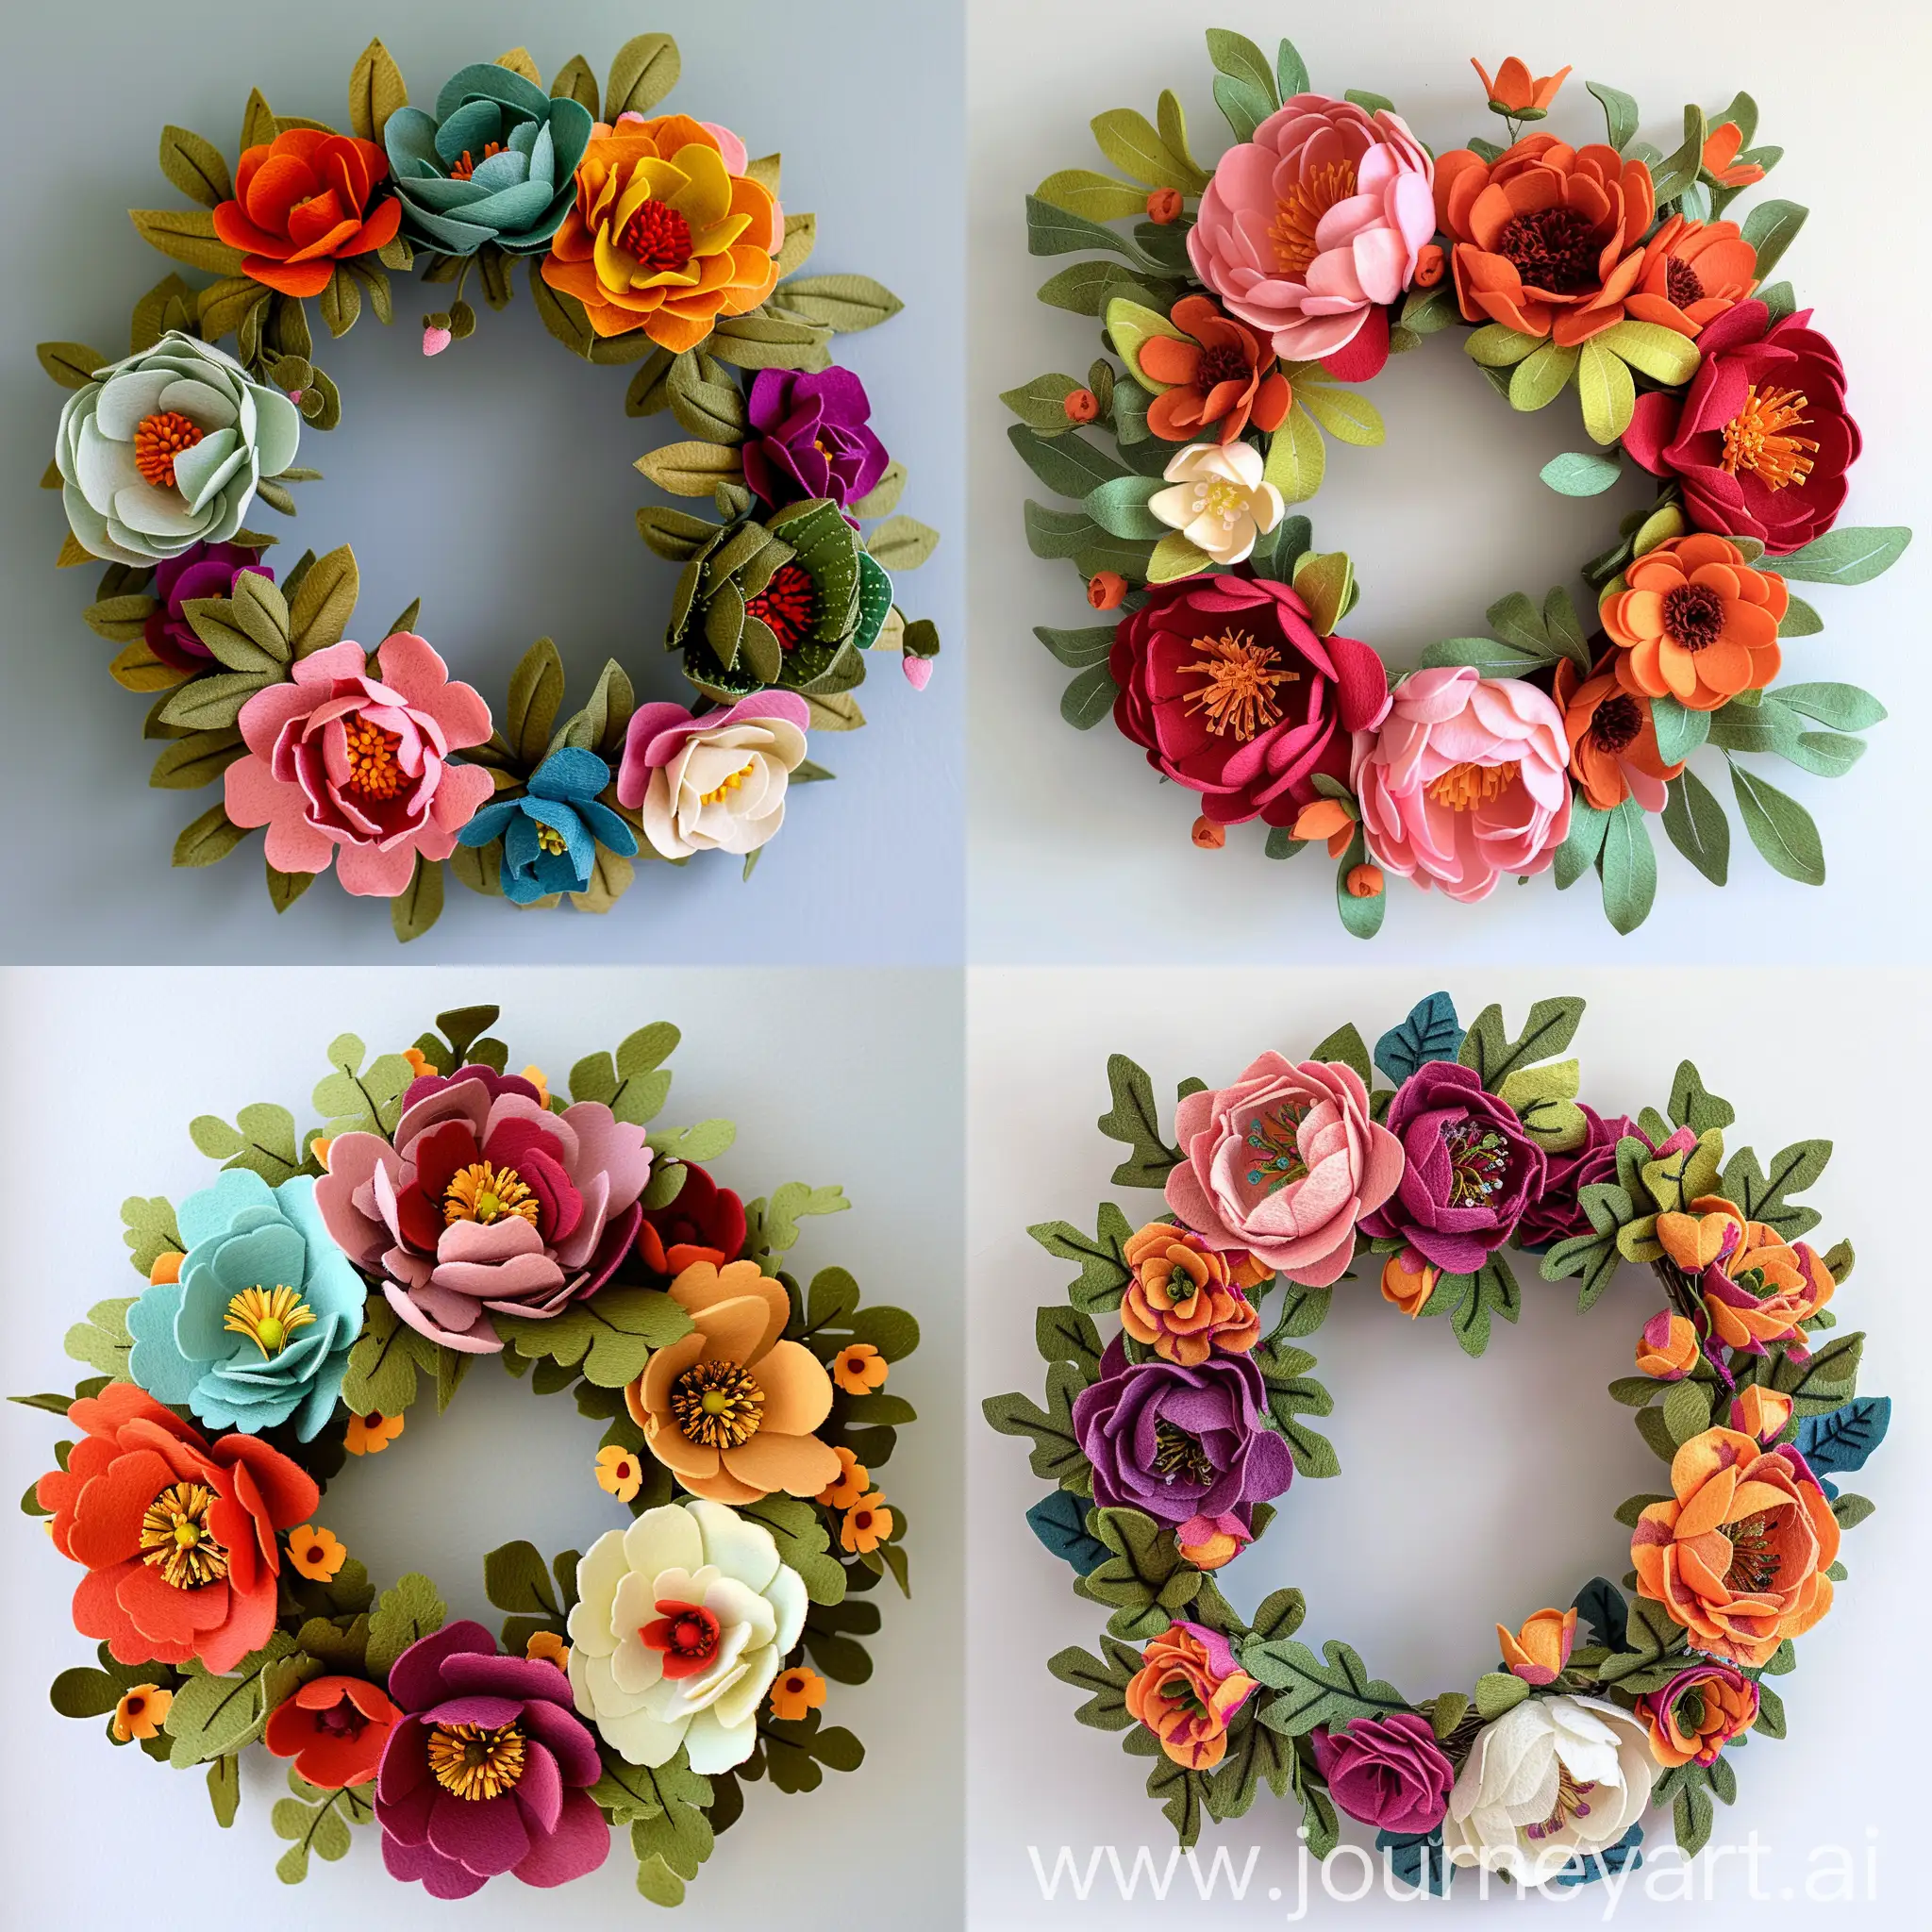 decorative wreath of peony and poppies made from felt sheets simple design symmetrical color harmony simple design not many details